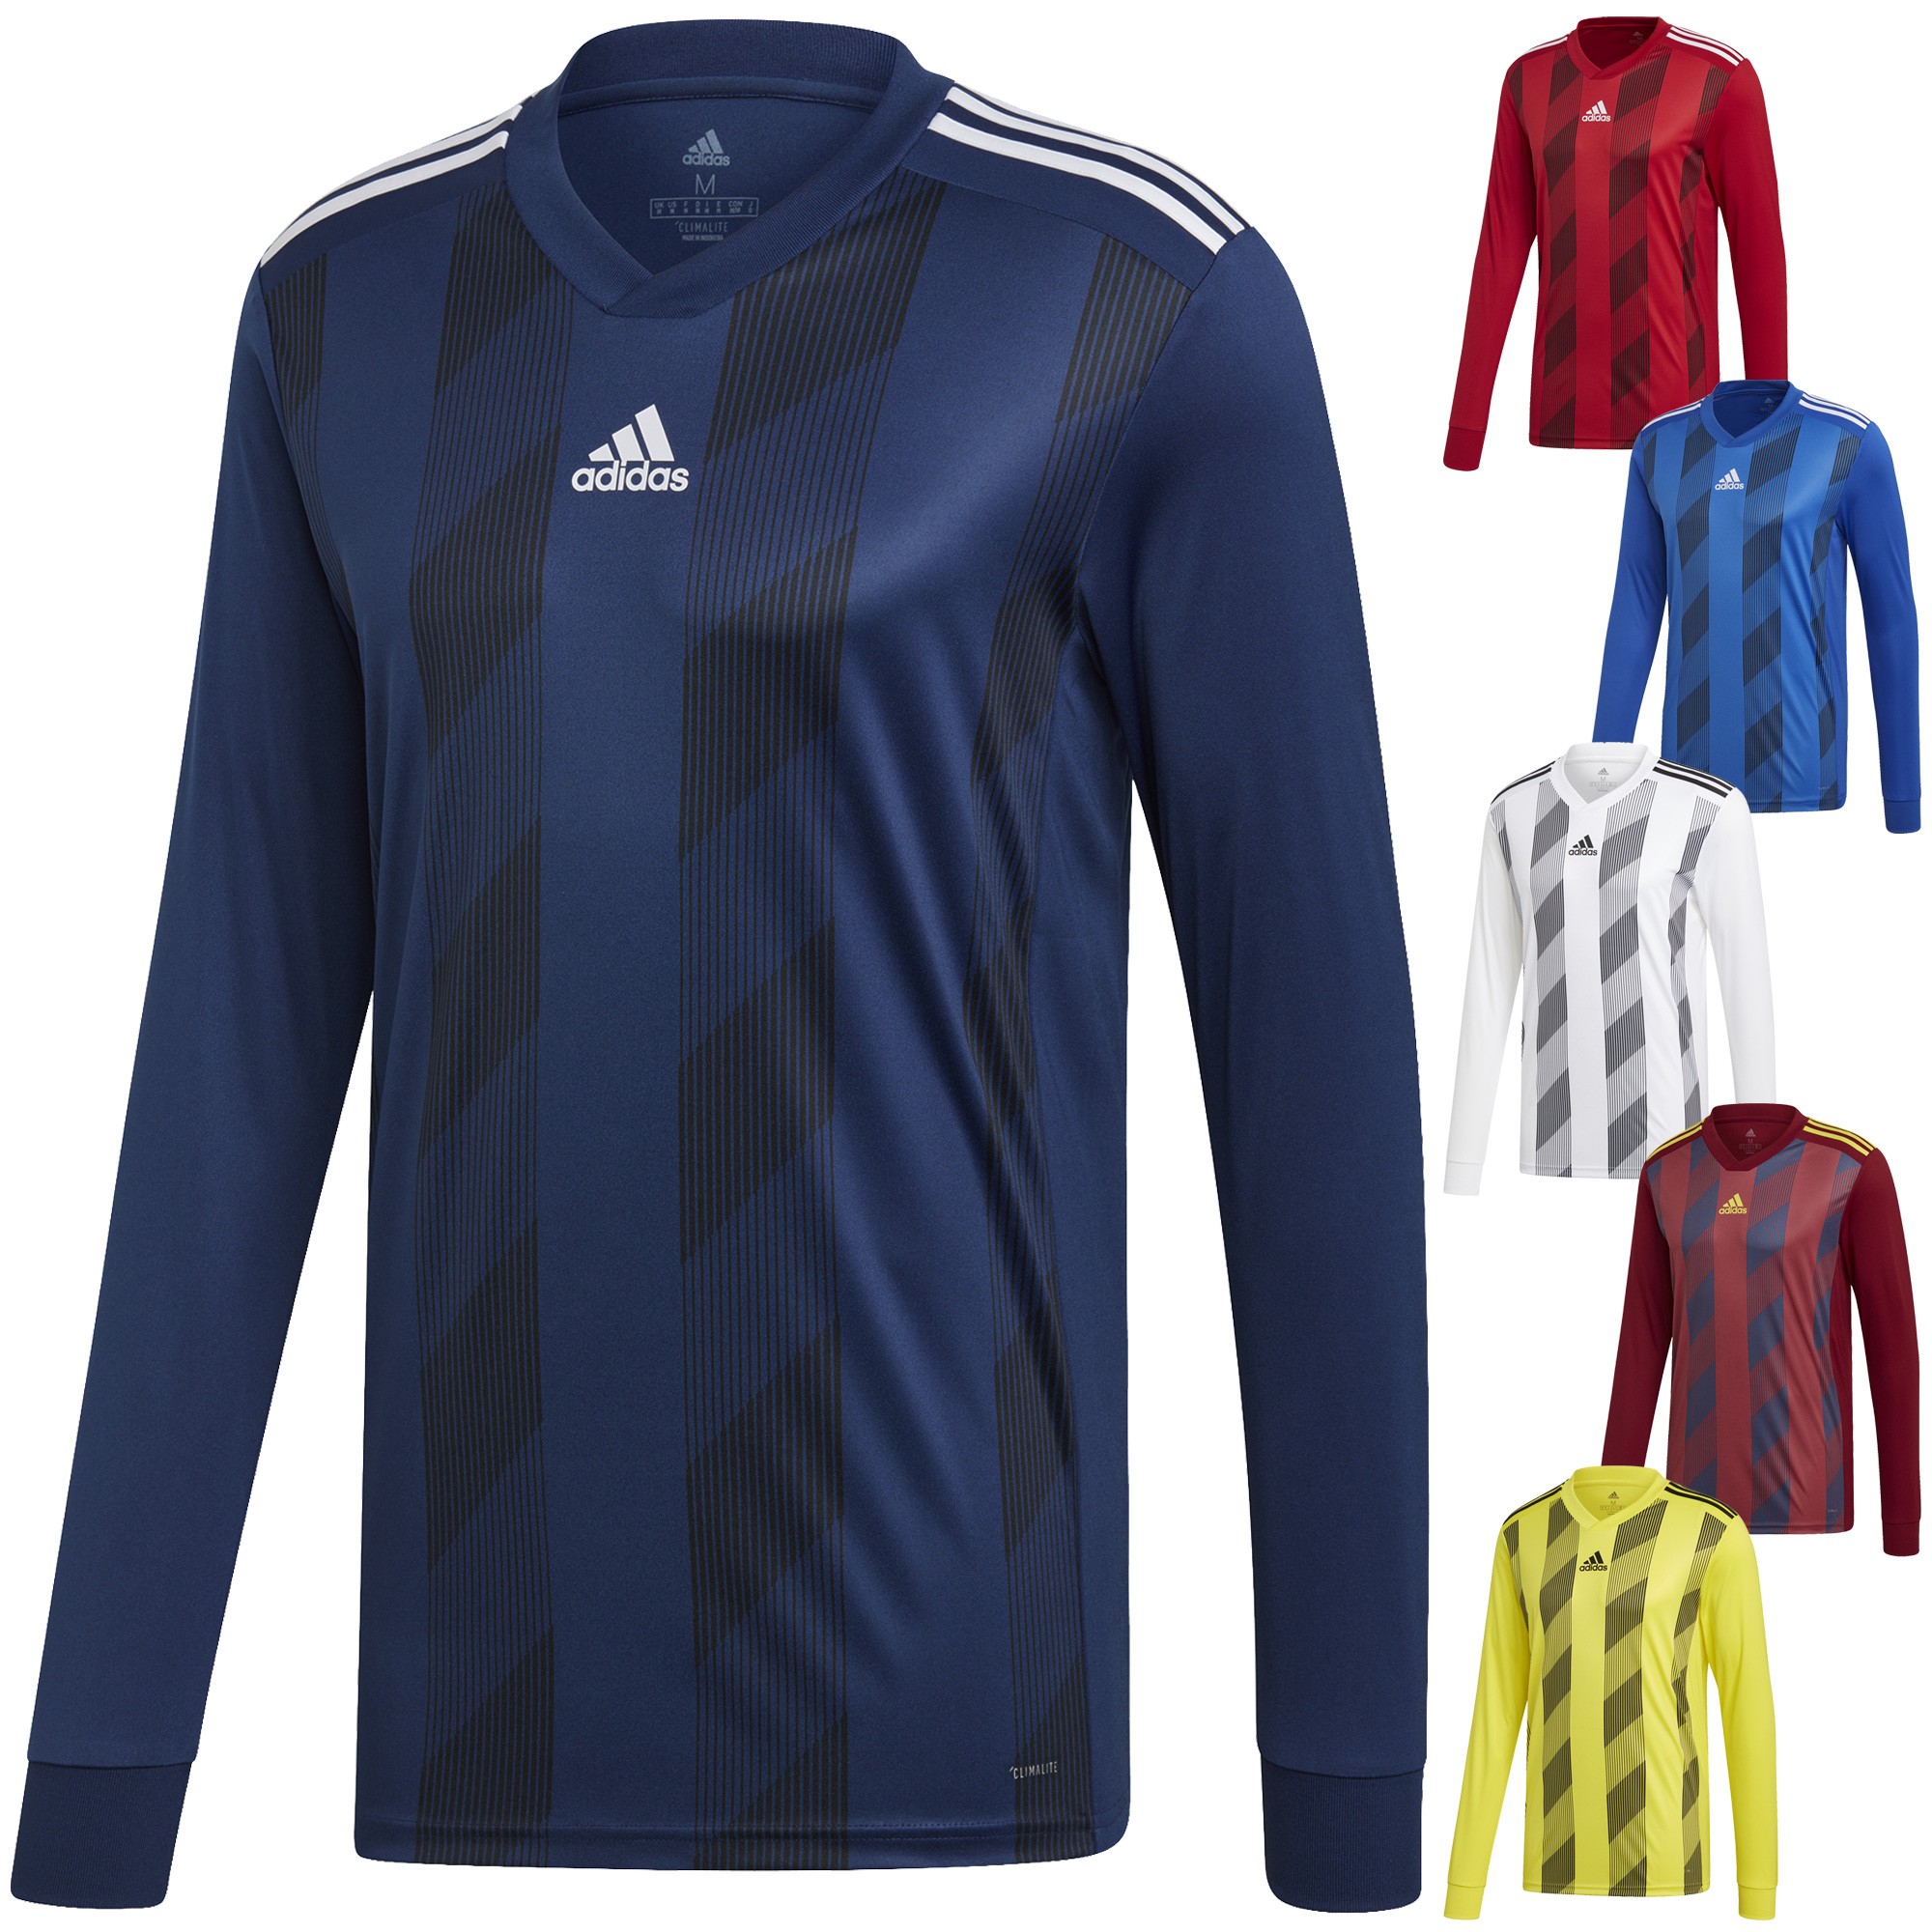 maillot adidas striped